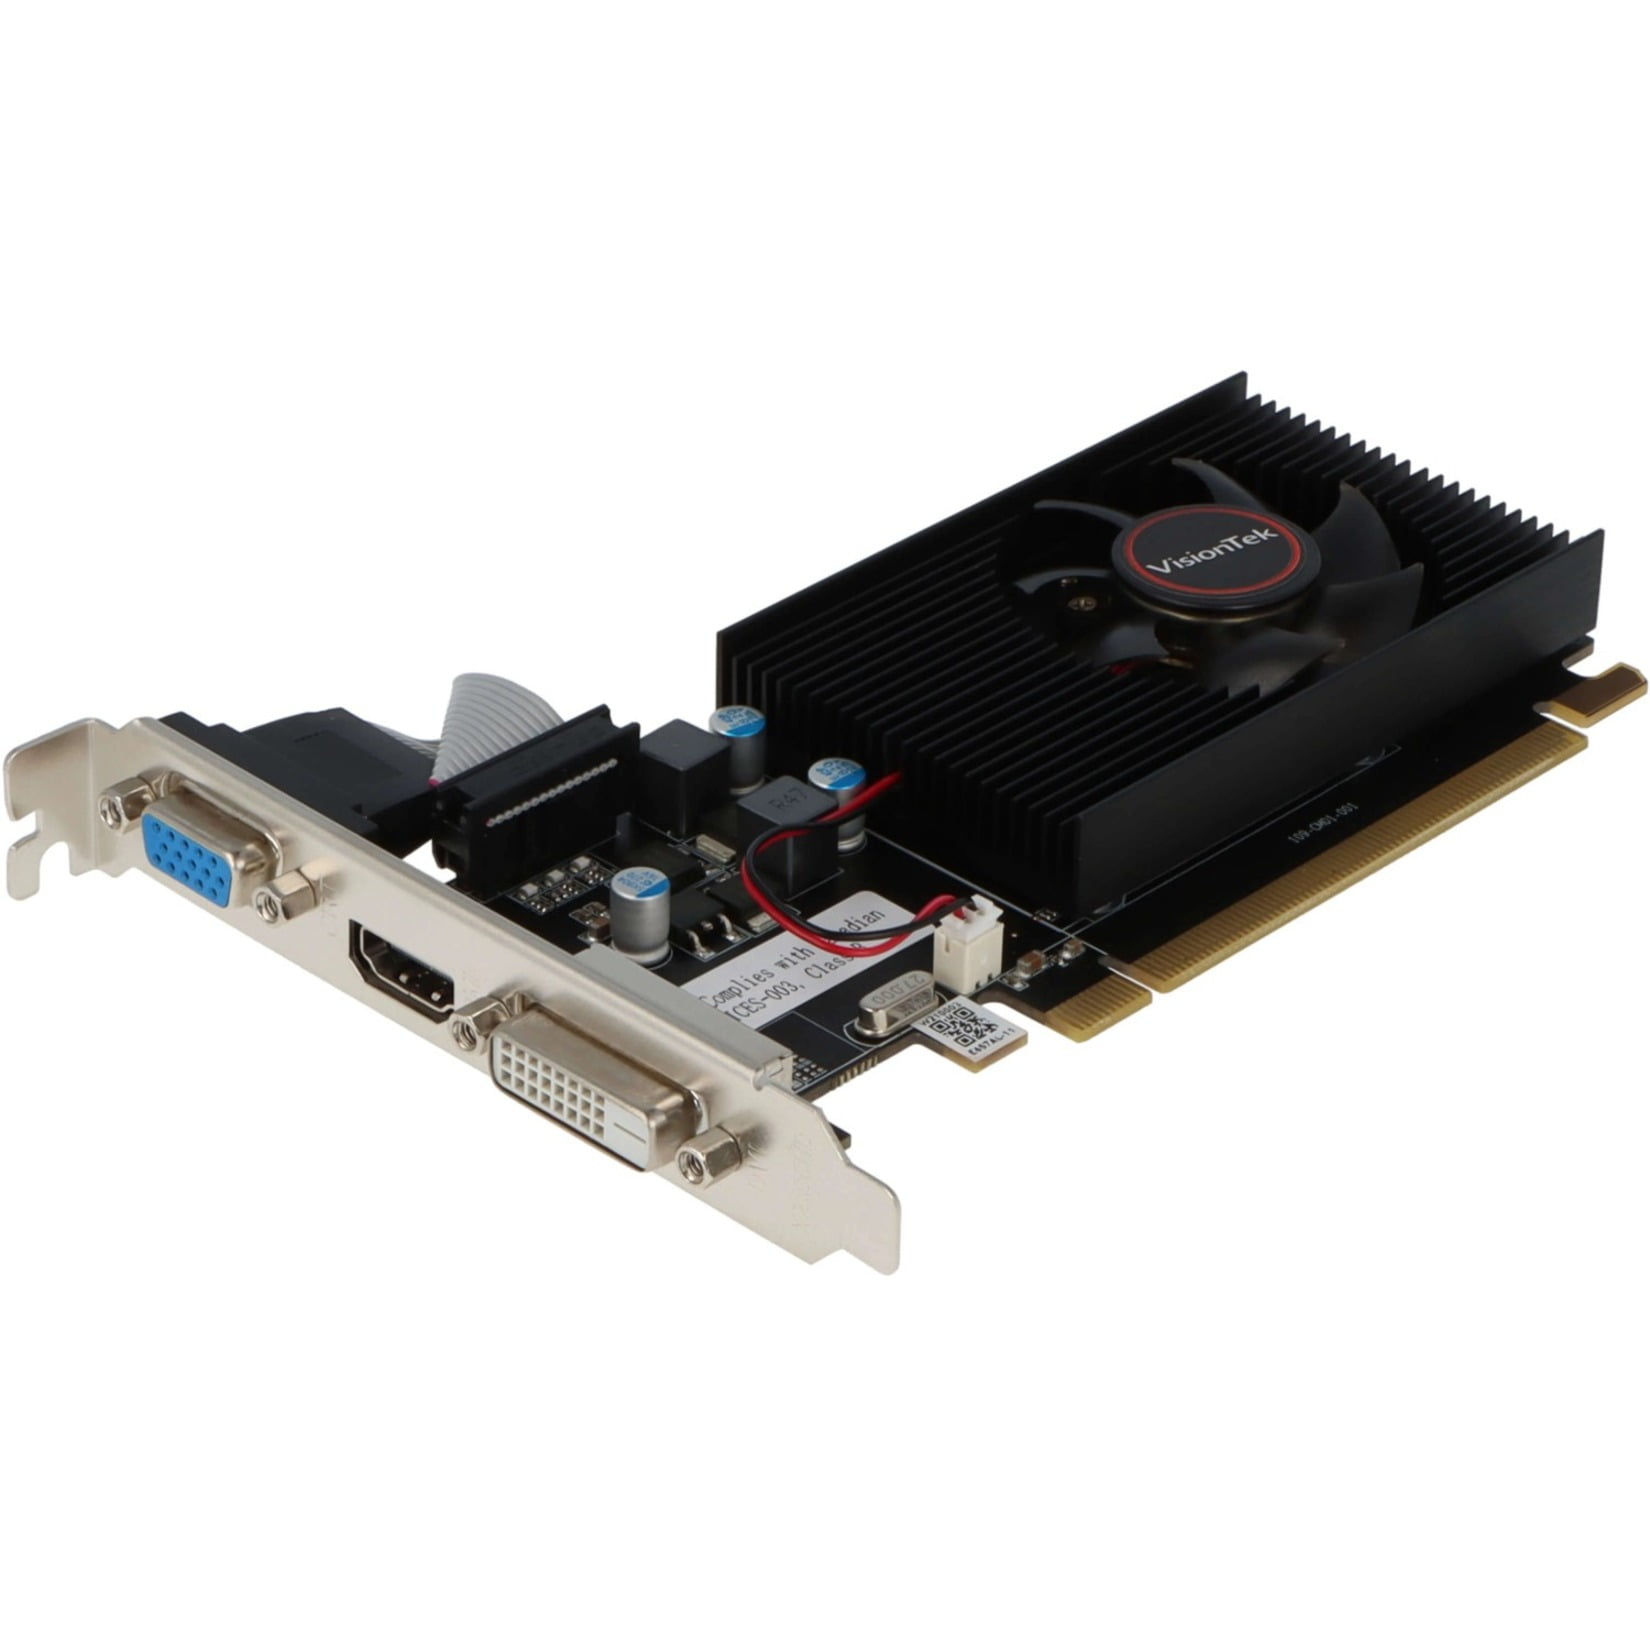 Picture of Visiontek 901491 1GB GDDR3 PCI Express Video Card